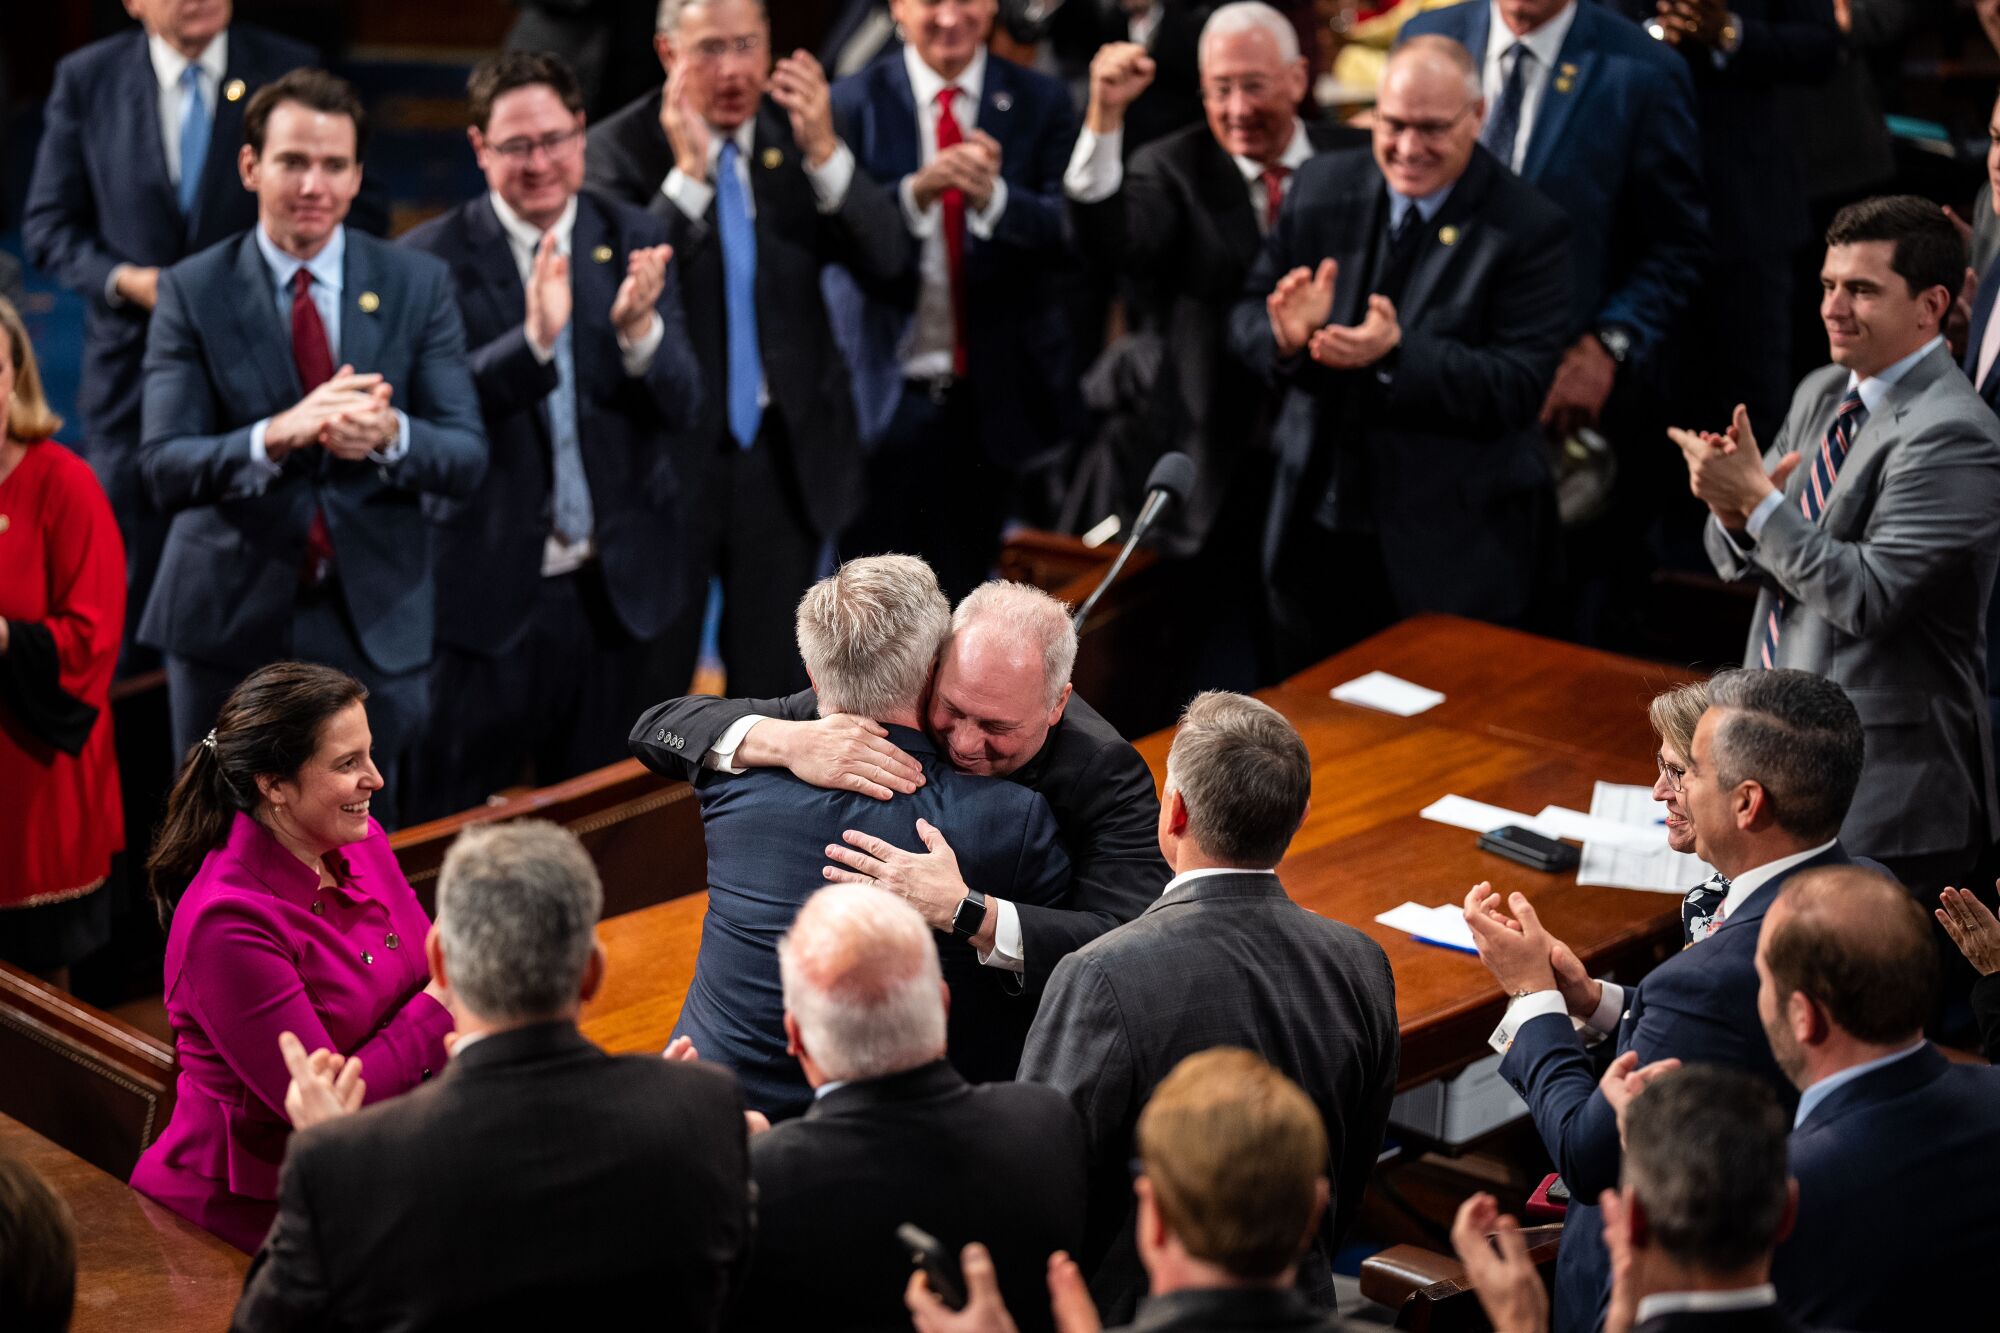 Two lawmakers hugging as others applaud